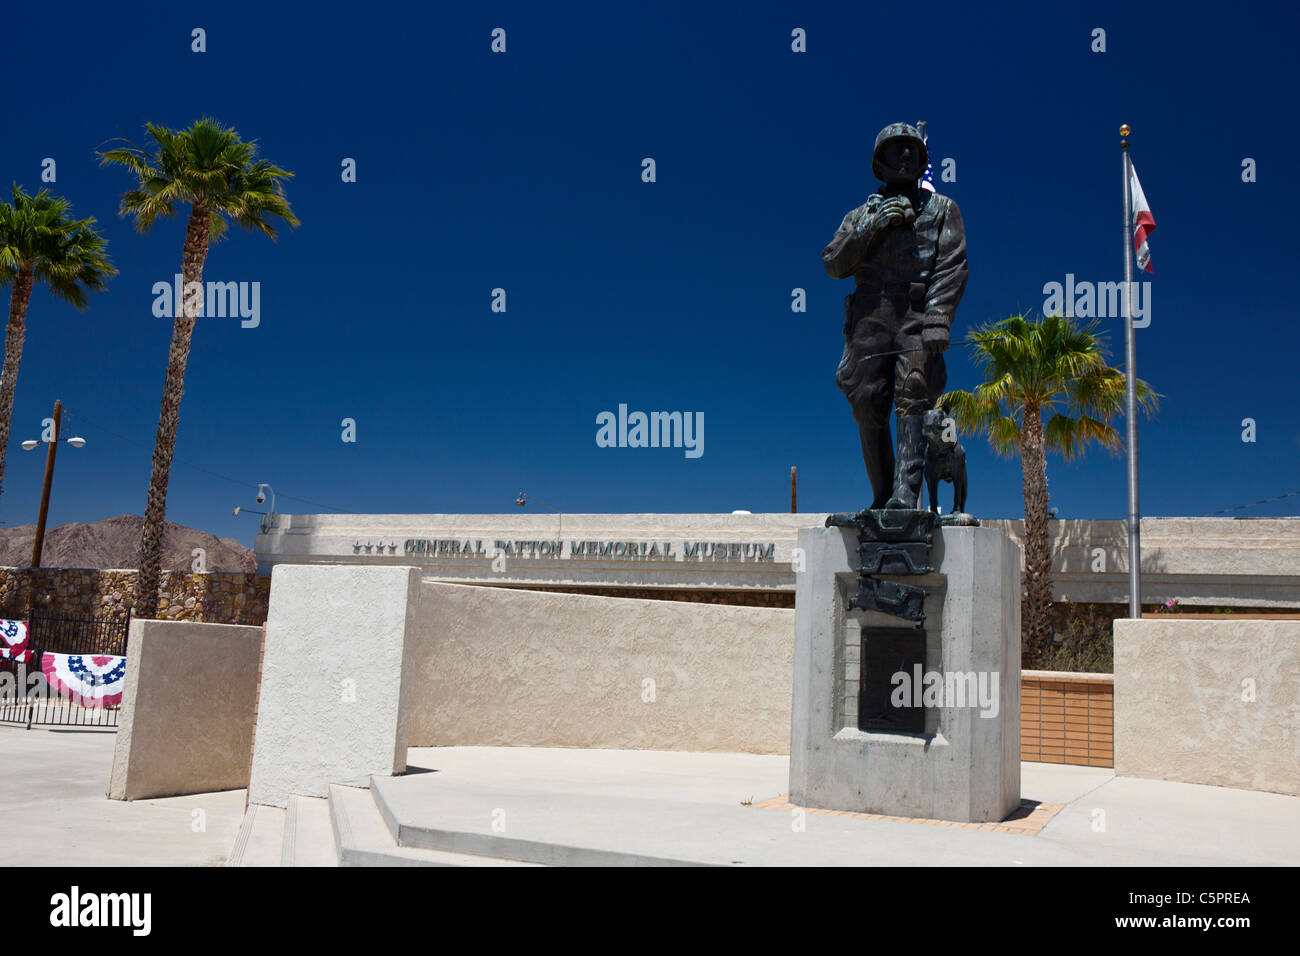 Exterior of General Patton Memorial Museum, with statue of Gen. Patton, Chiriaco Summit, California, United States of America. Stock Photo